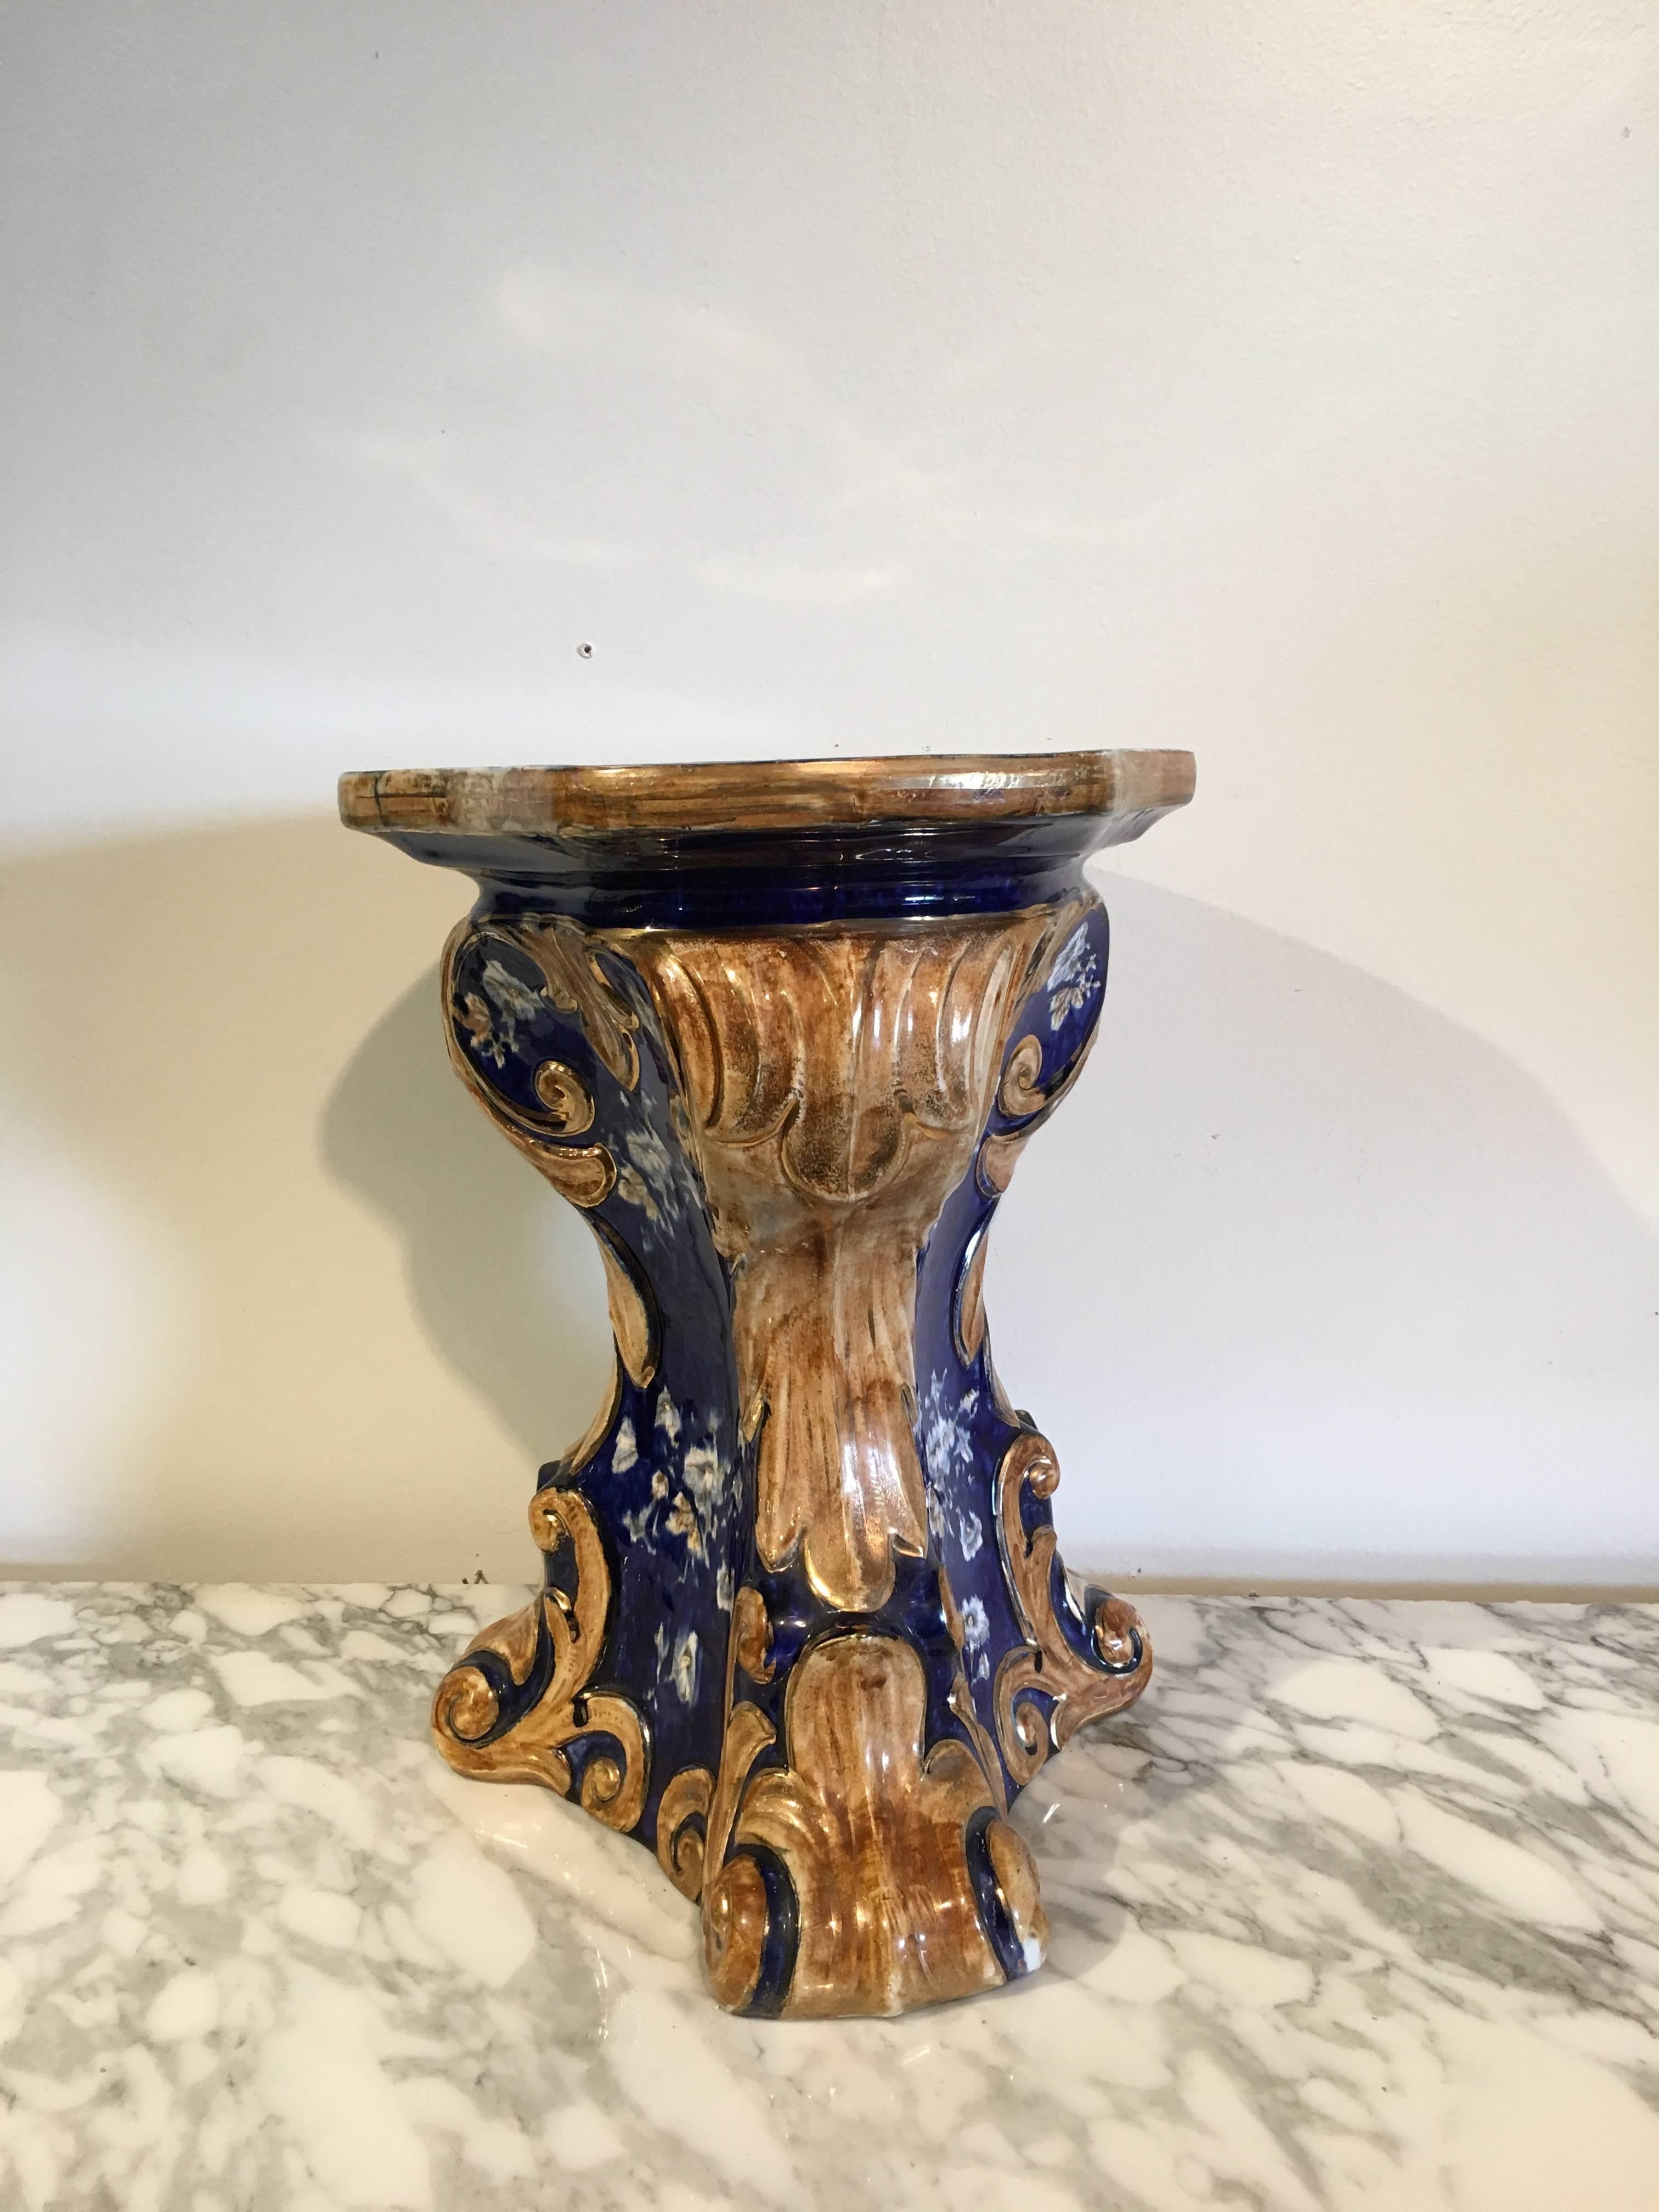 A gorgeous Majolica garden seat or plant stand, late 19th century, Italy. Decorated in a deep cobalt blue, with clusters of white hibiscus. Scrolling acanthus leaves in a pleasing dark straw color and highlighted in gilt forming the 